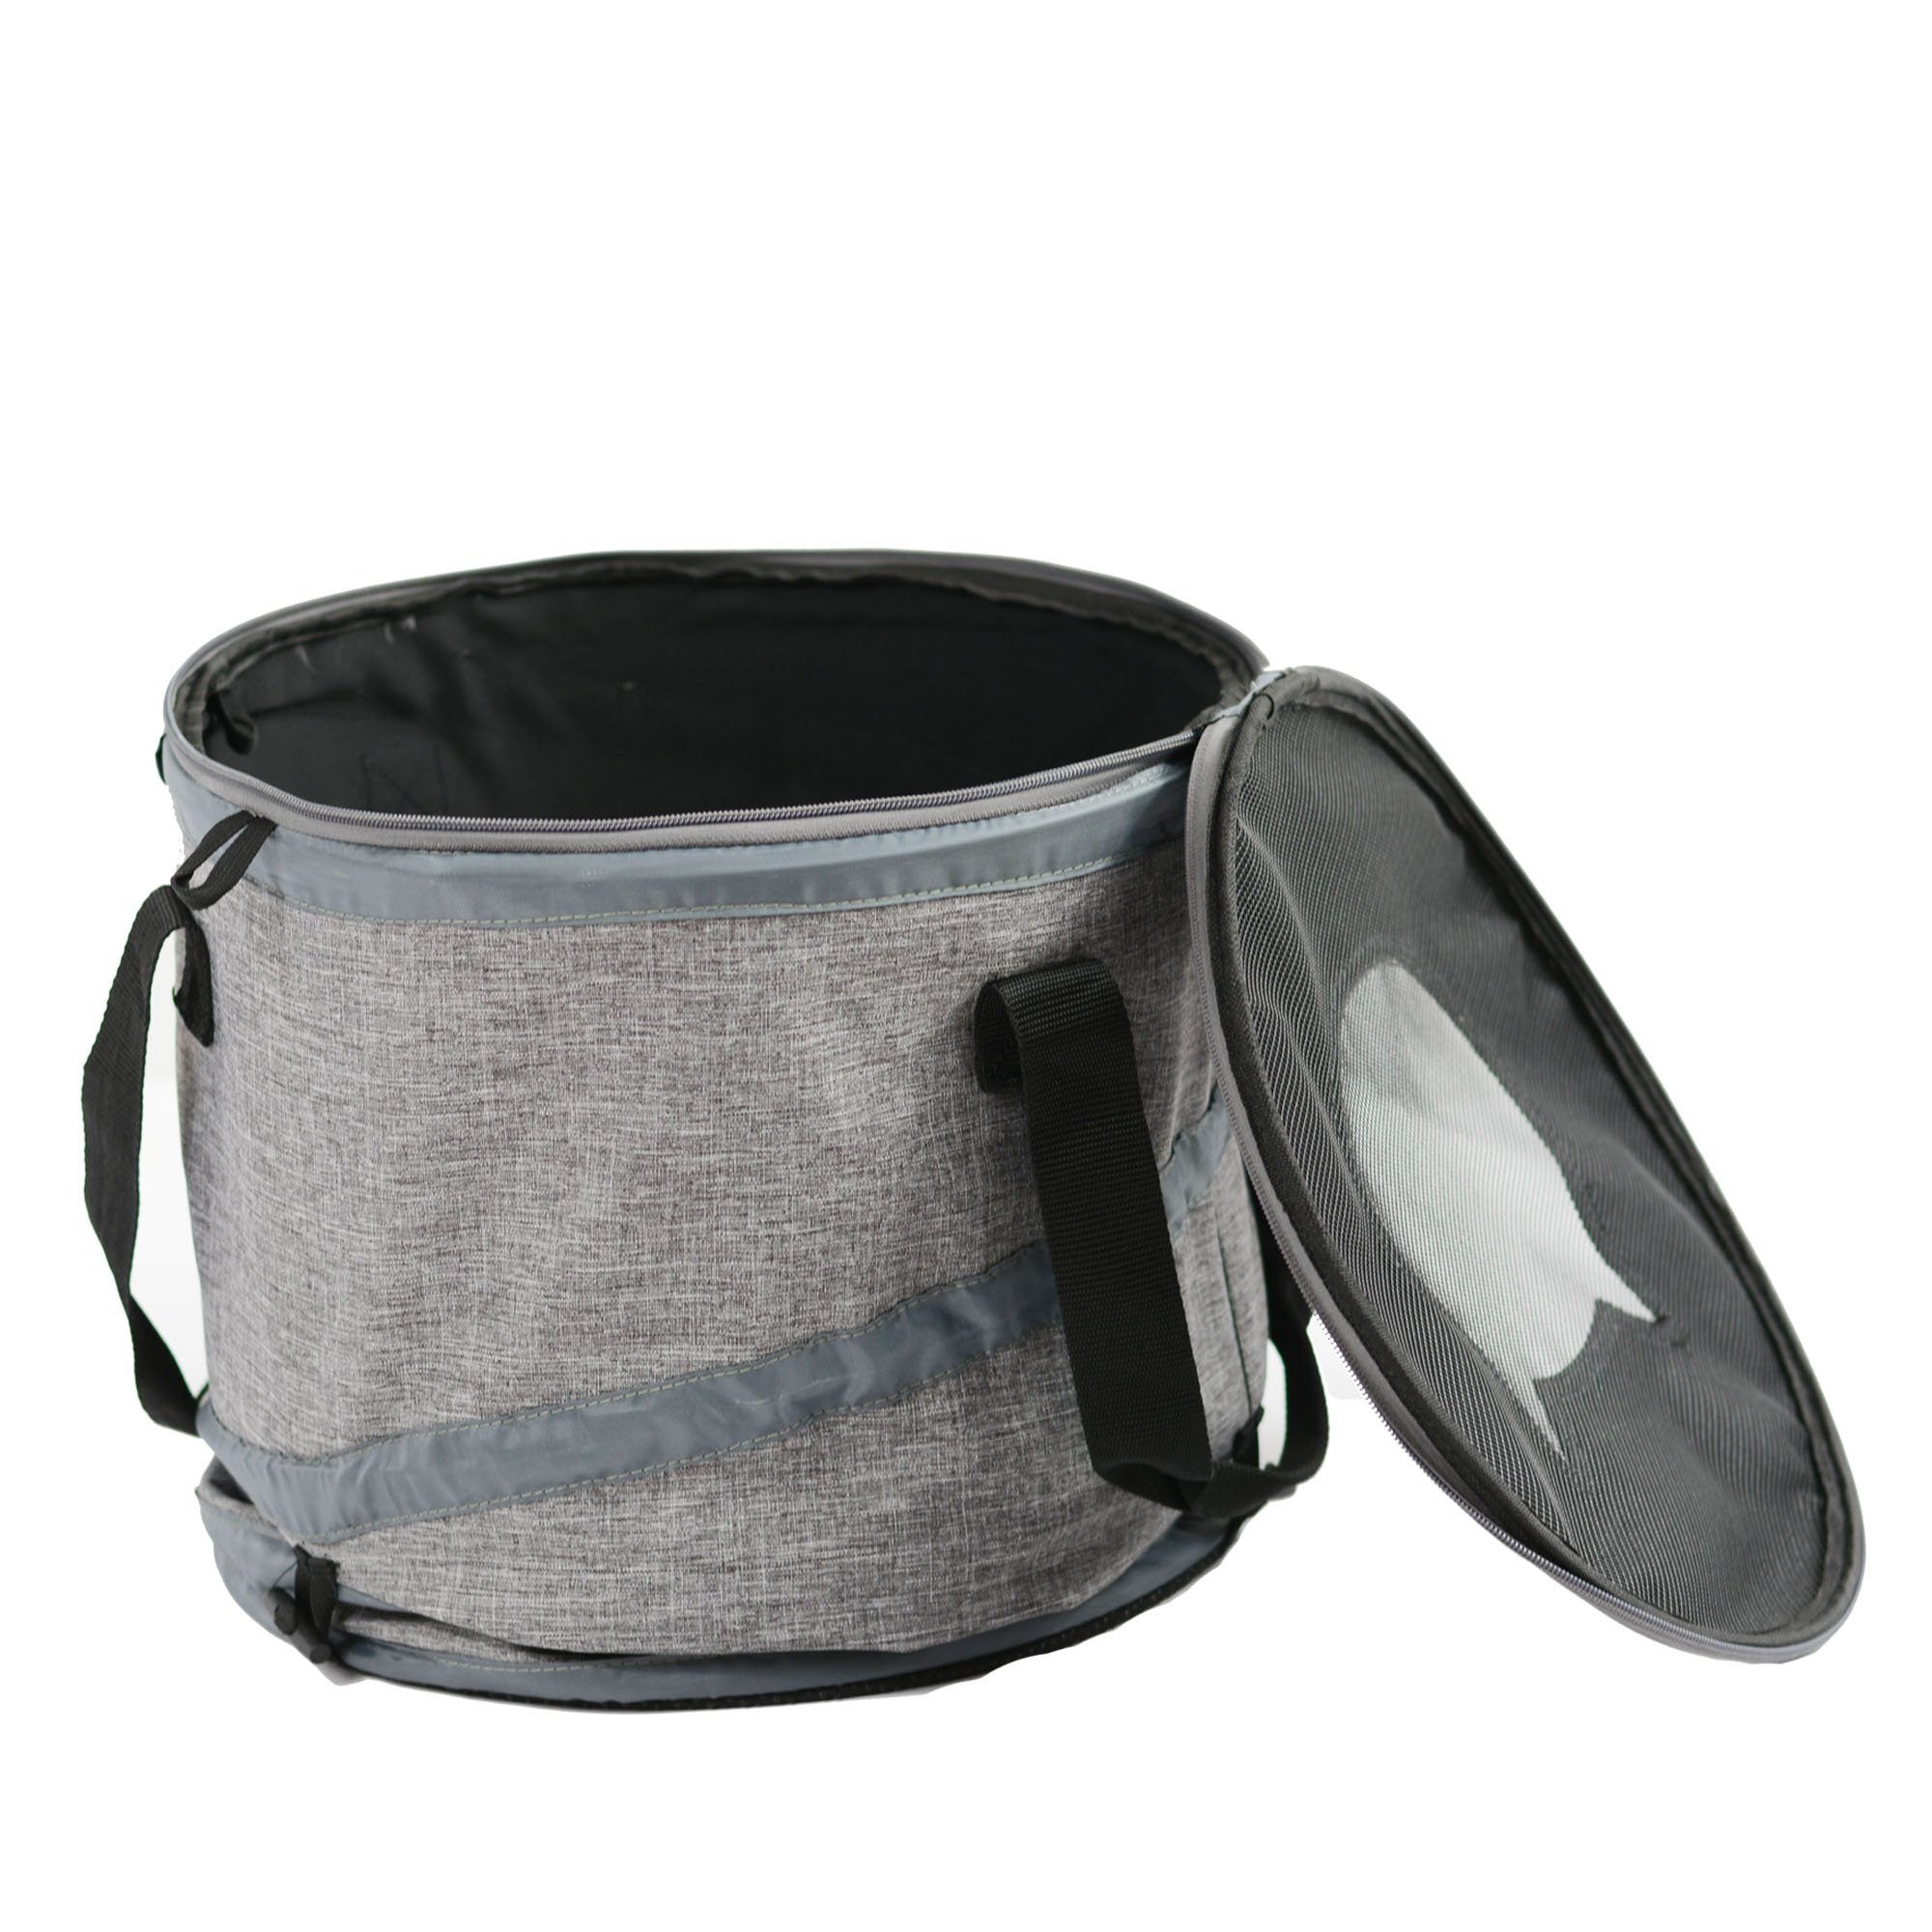 3-in-1 Multifunction Tunnel Pet Bag